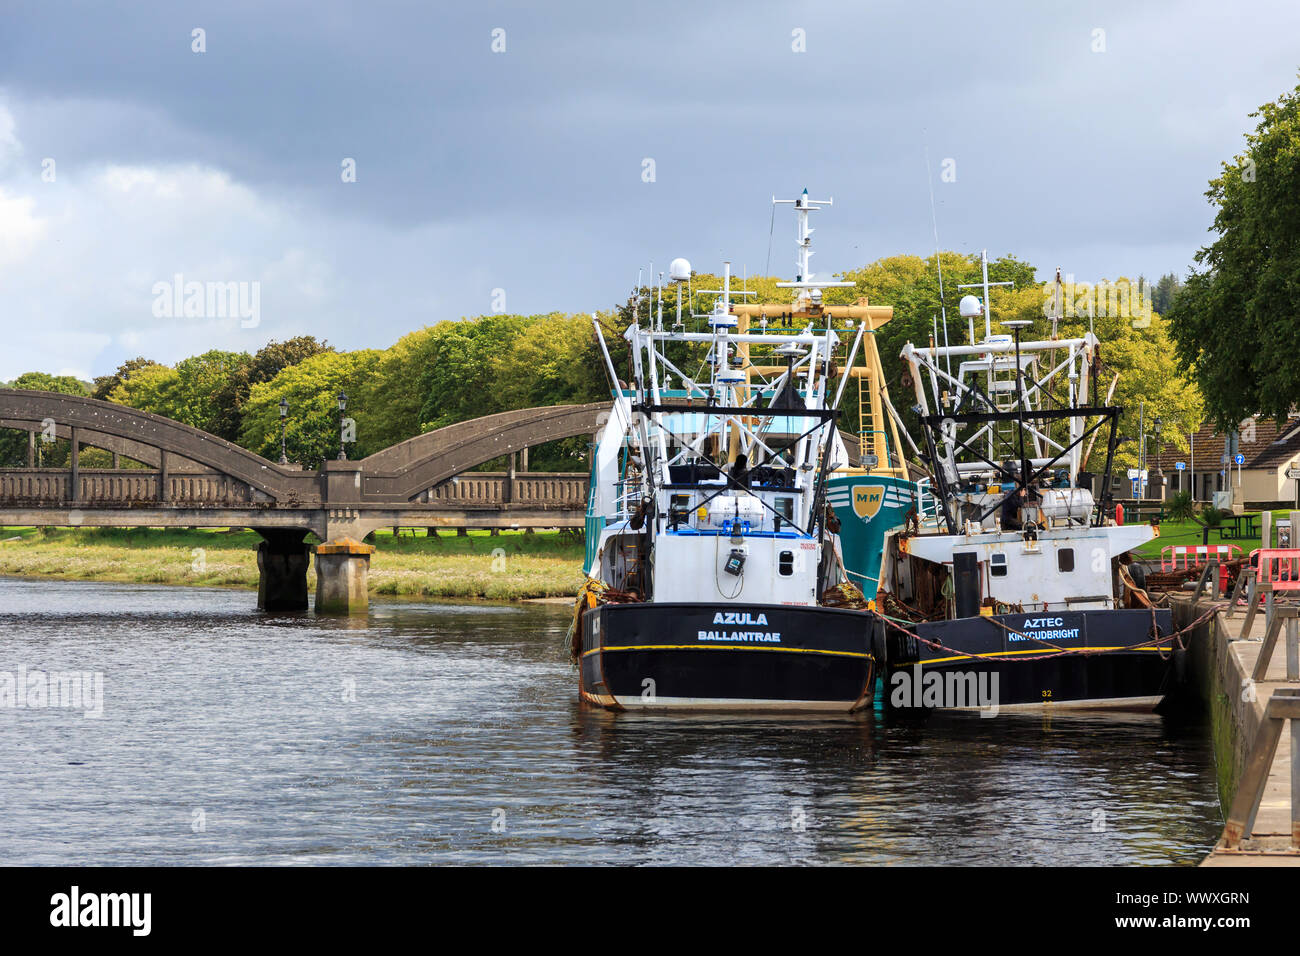 KIRKCUDBRIGHT, SCOTLAND - AUGUST 13, 2019: Fishing boats moored at the side of the harbour in Kirkcudbright Stock Photo